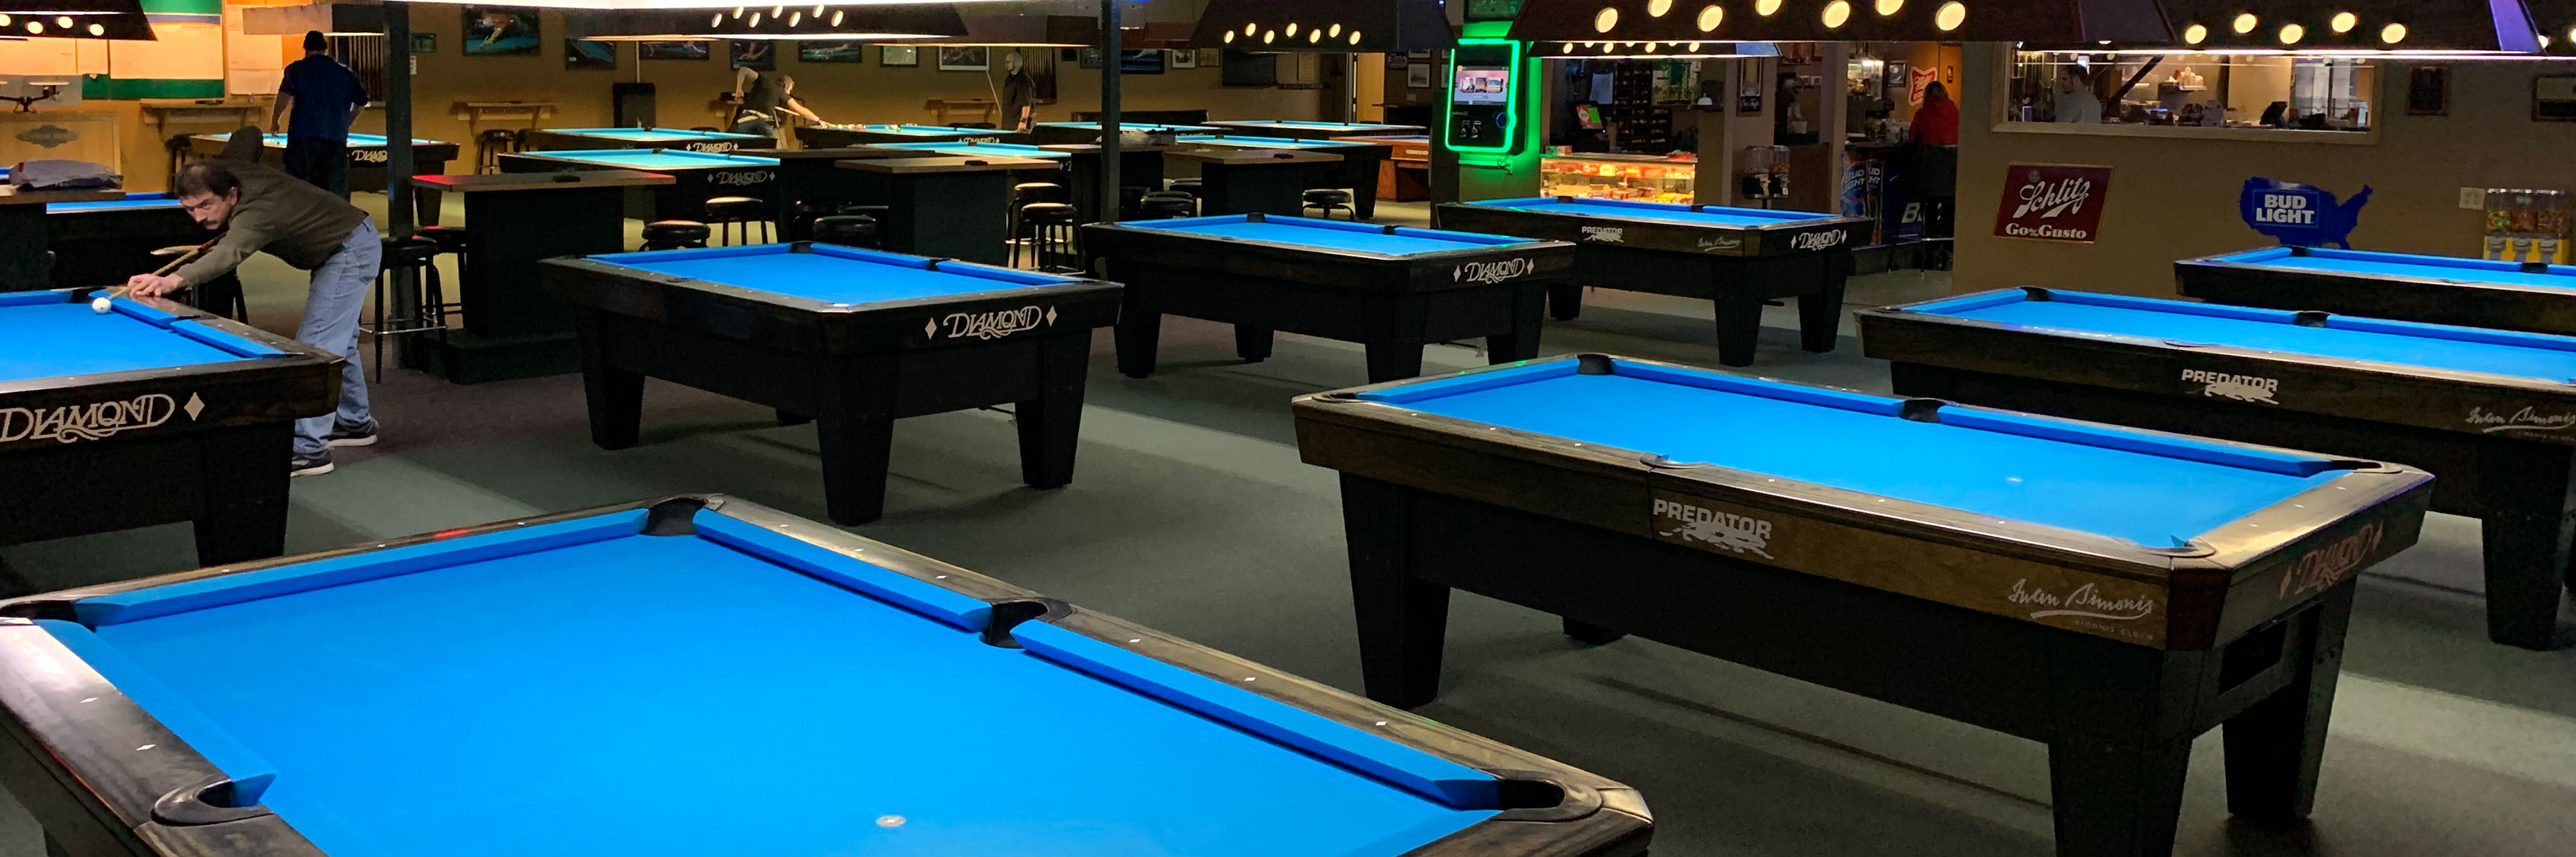 The Carom Room is a premier pool room providing an exceptional experience with Diamond billiard tables, tournaments, leagues, a full bar, and food.